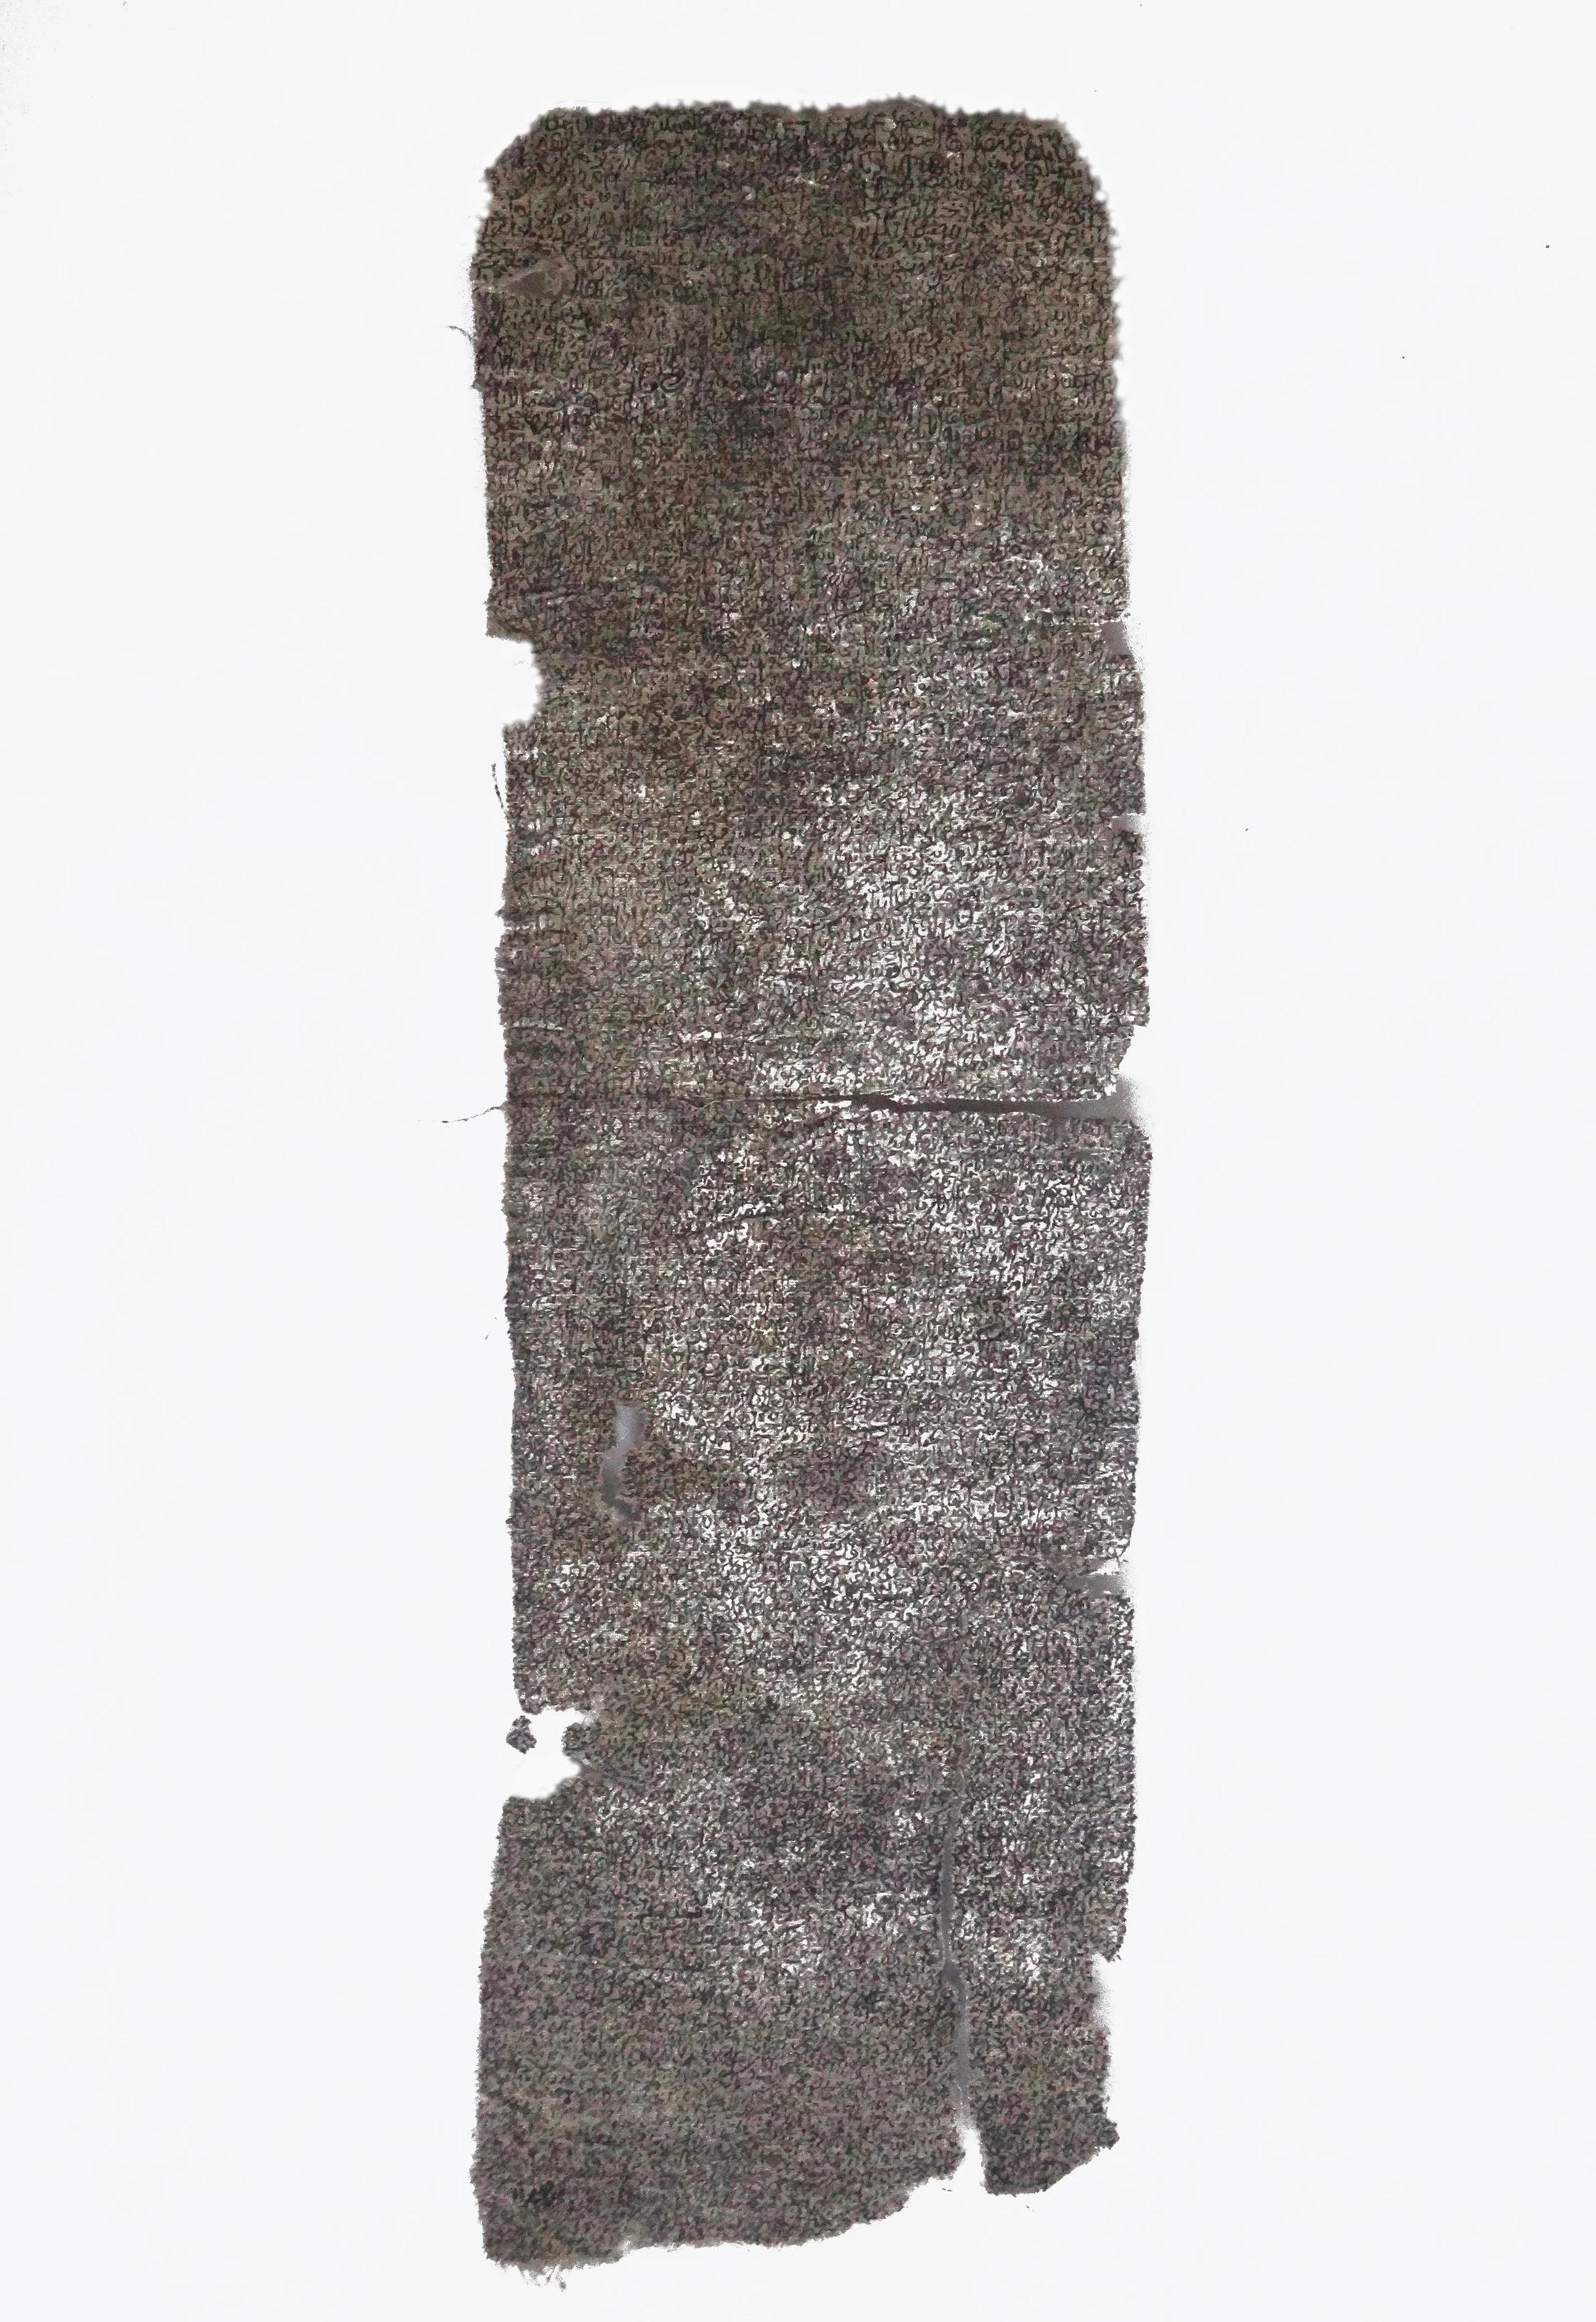 "Abstract Script 9" Ink on Fabric Painting 16" x 4" inch by Mohamed Monaiseer